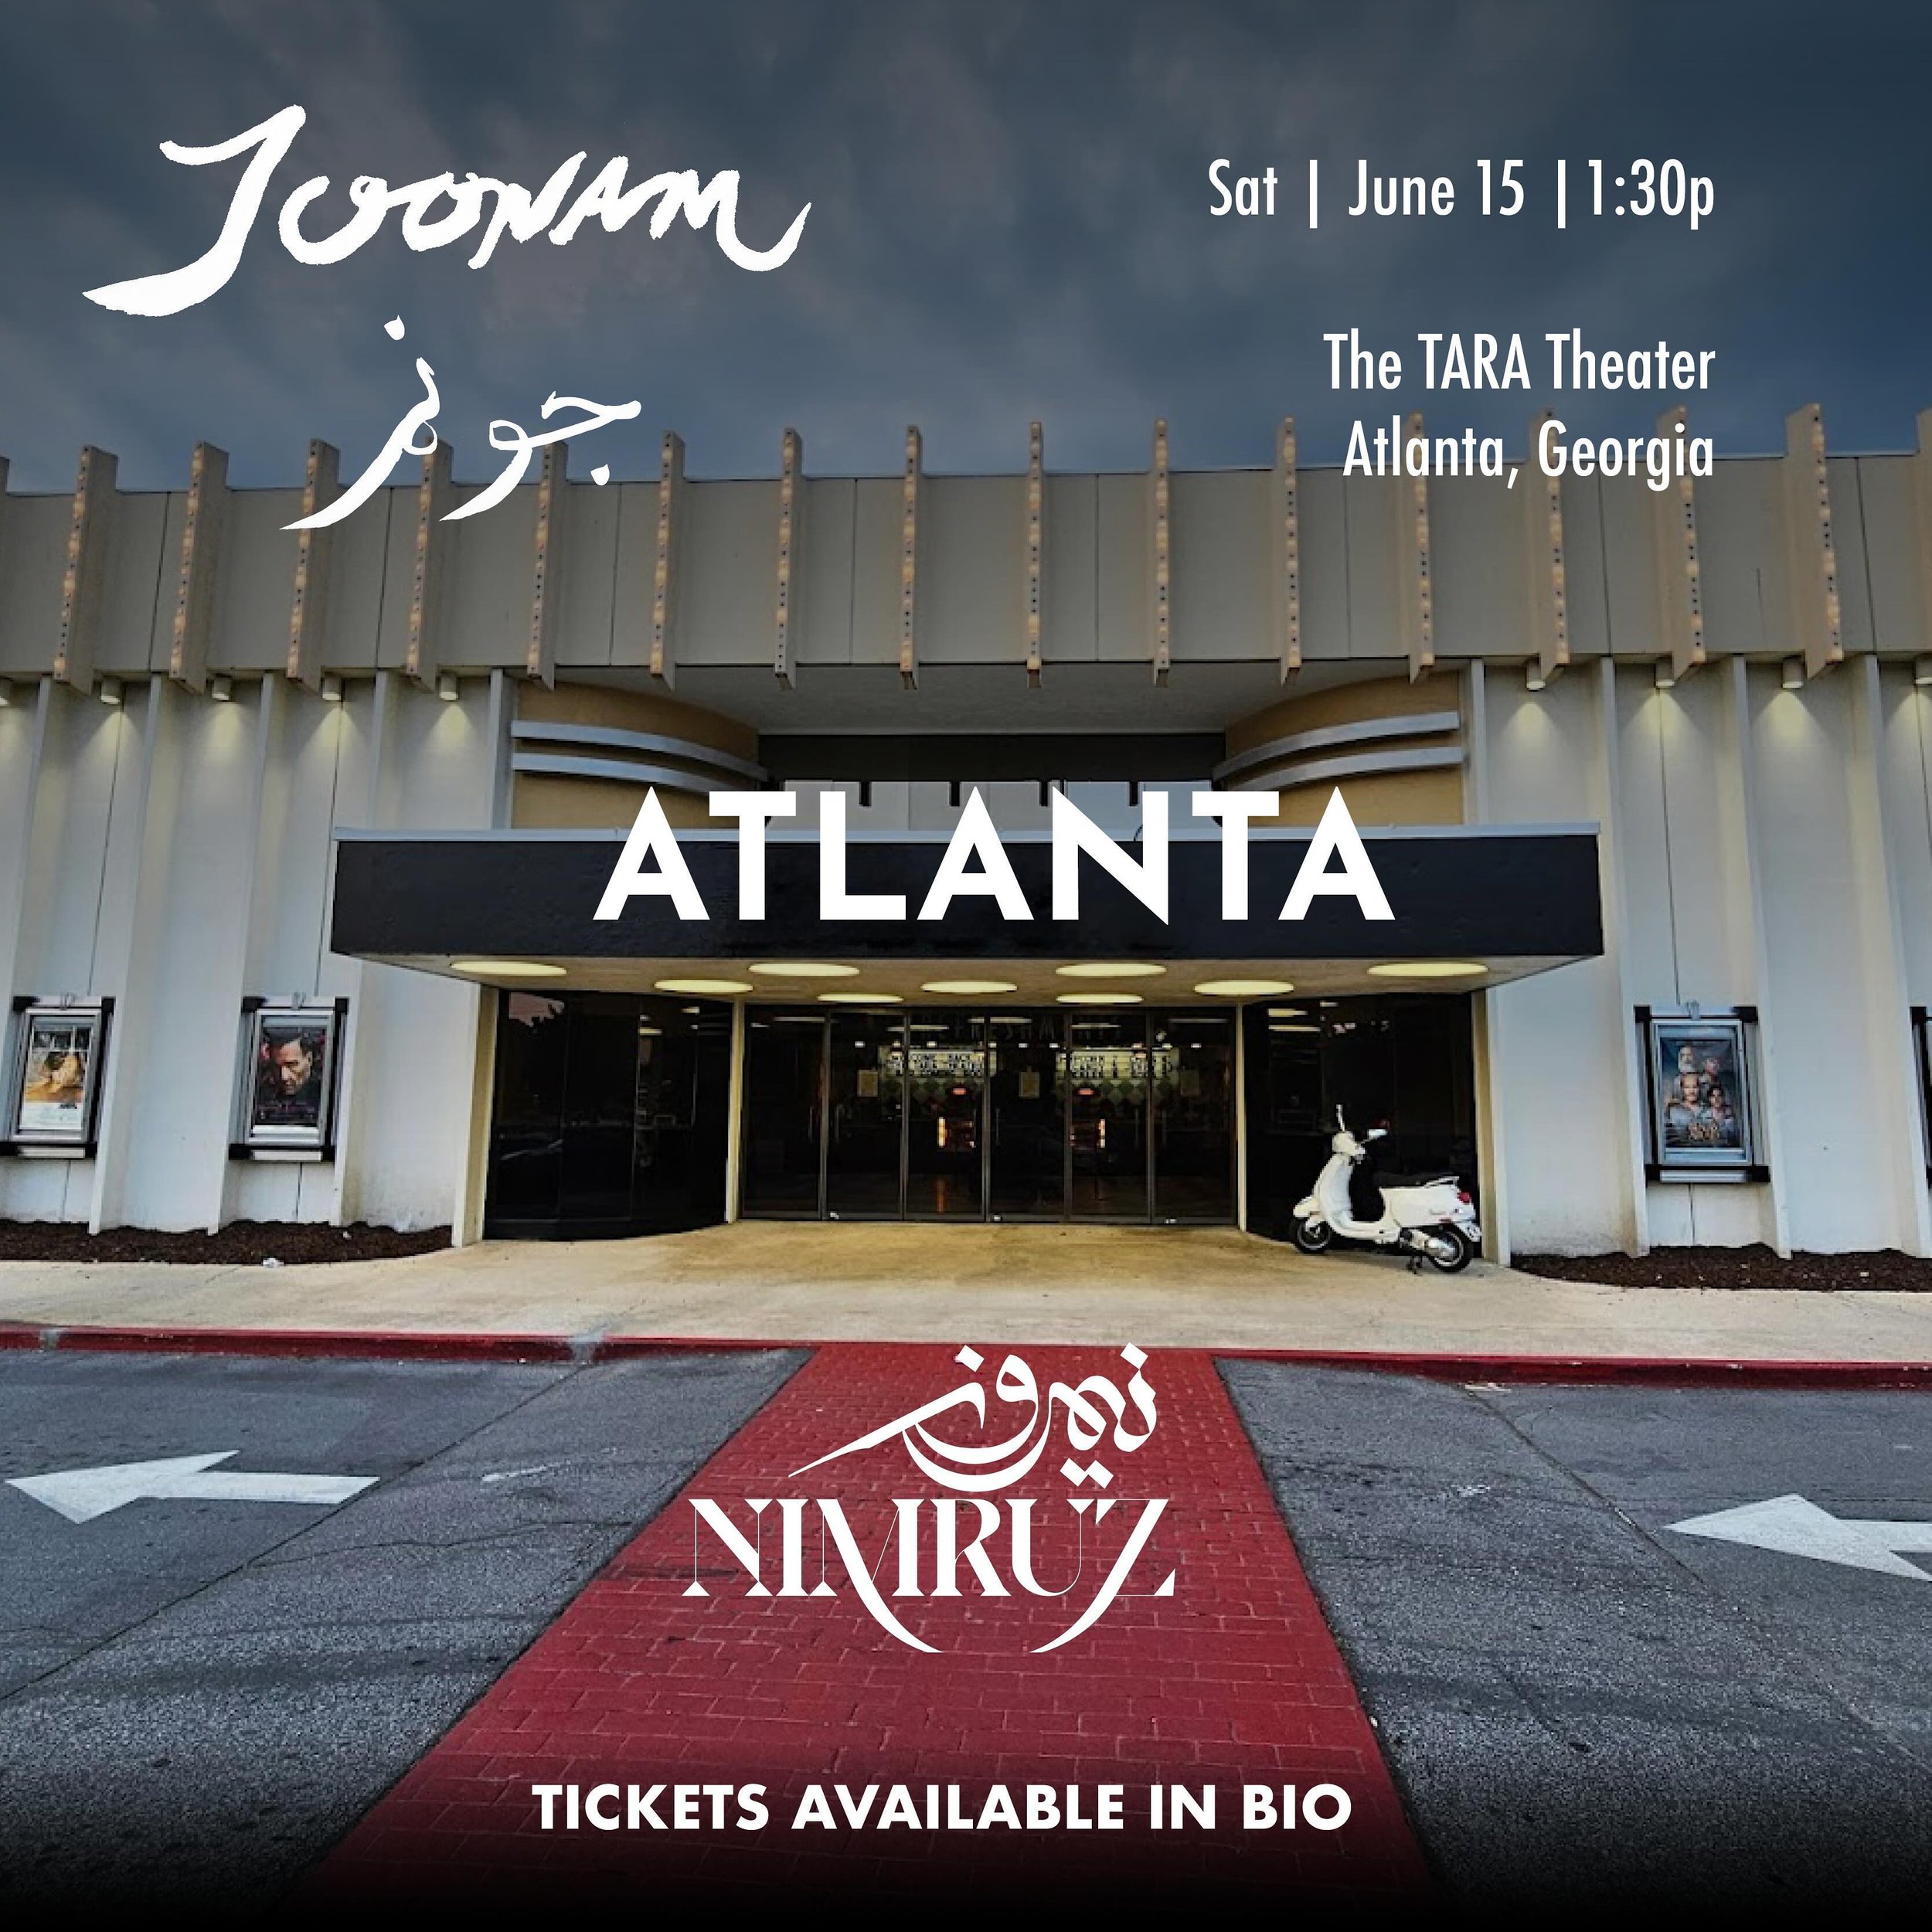 ATLANTA! Joonam plays on June 15th @thetaraatlanta among an excellent selection of other Iranian films curated by @nimruzofficial for the The Nimruz Film Showcase! 
🎟️🎟️🎟️Get your tickets at the link in our bio!